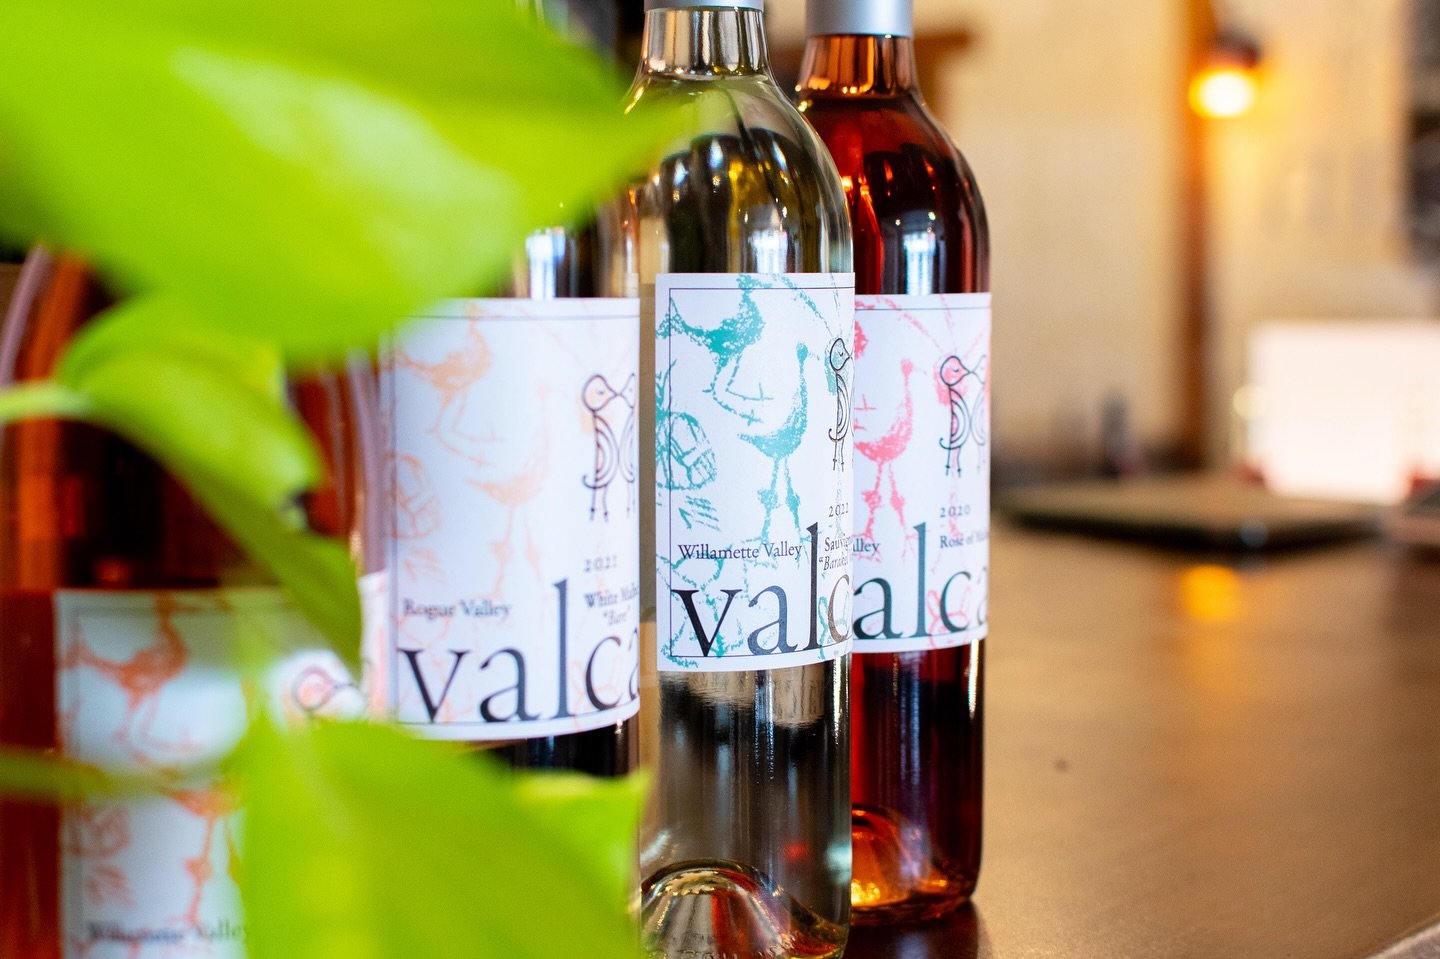 So excited to announce Two Person Trivia at @valcancellars on May 19th! 🥂

Grab a friend, significant other, or family member and get your trivia on at Valcan in downtown Corvallis! Each ticket includes reservation for two people to play and a glass